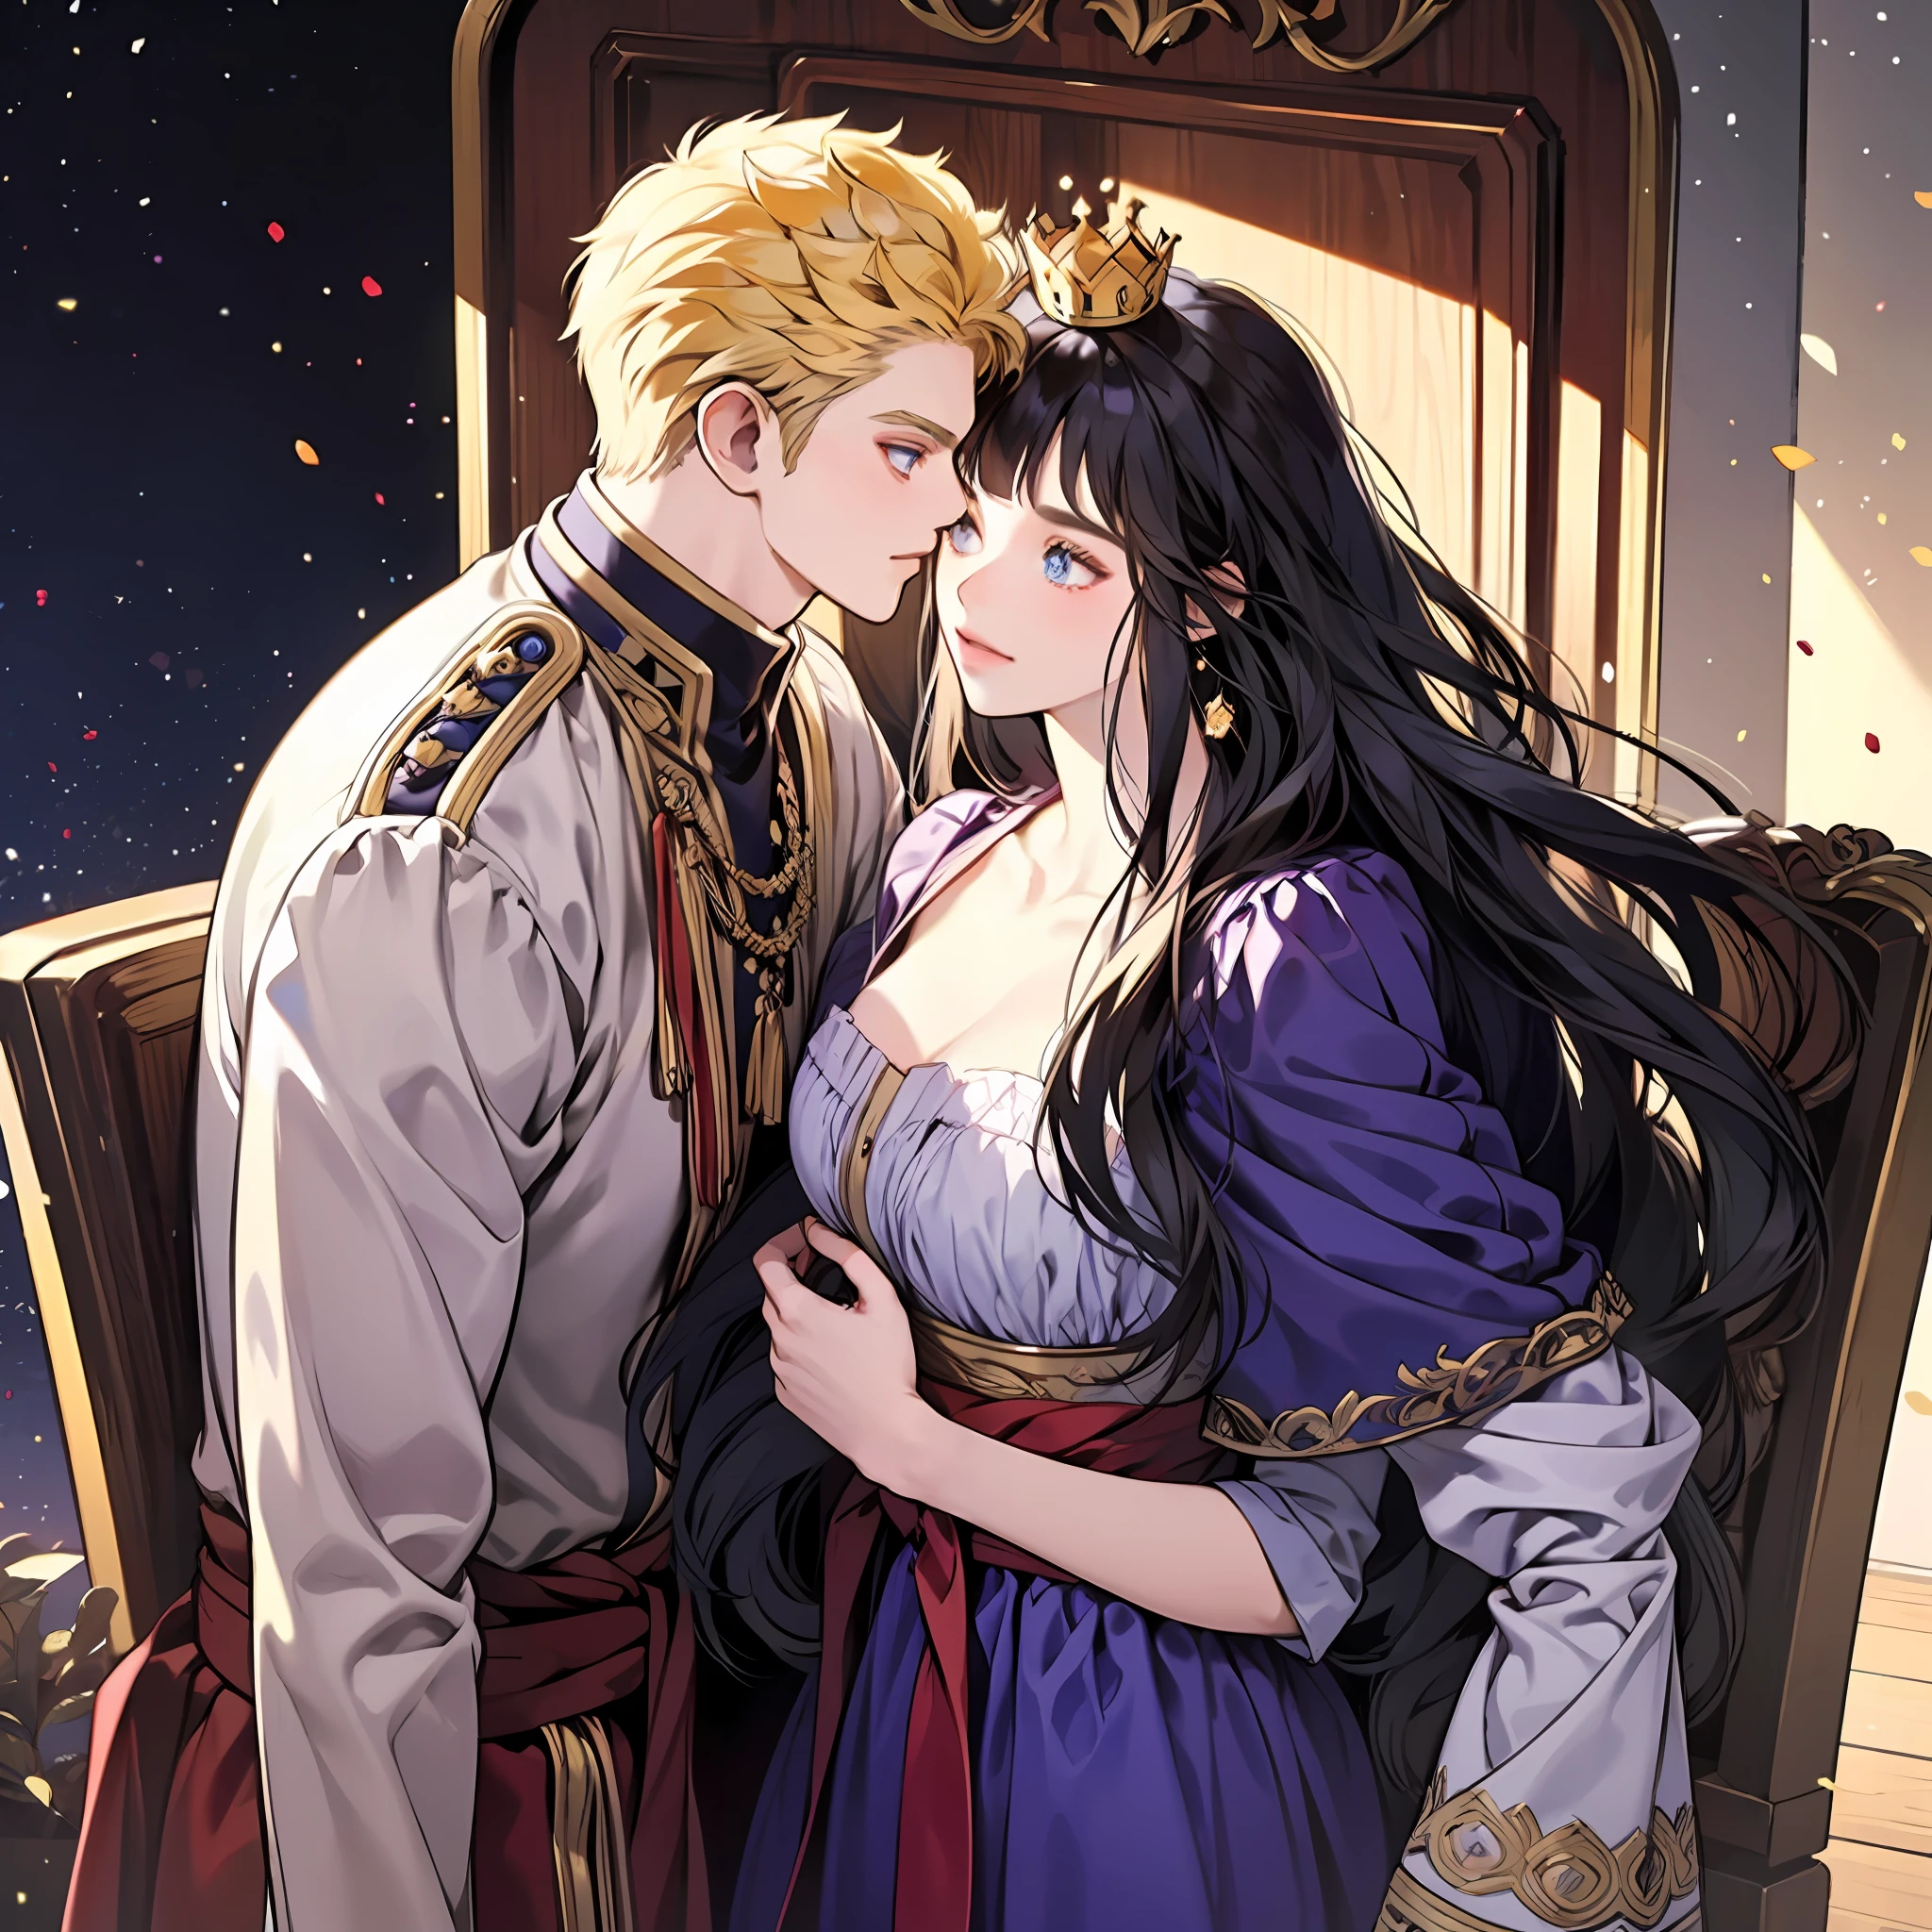 blonde man, dark blue hair girl, naruhina, throne, masterpiece, couple, standing, royalti, nobility, (((crowns))), king, queen, looking into each other eyes, romantic